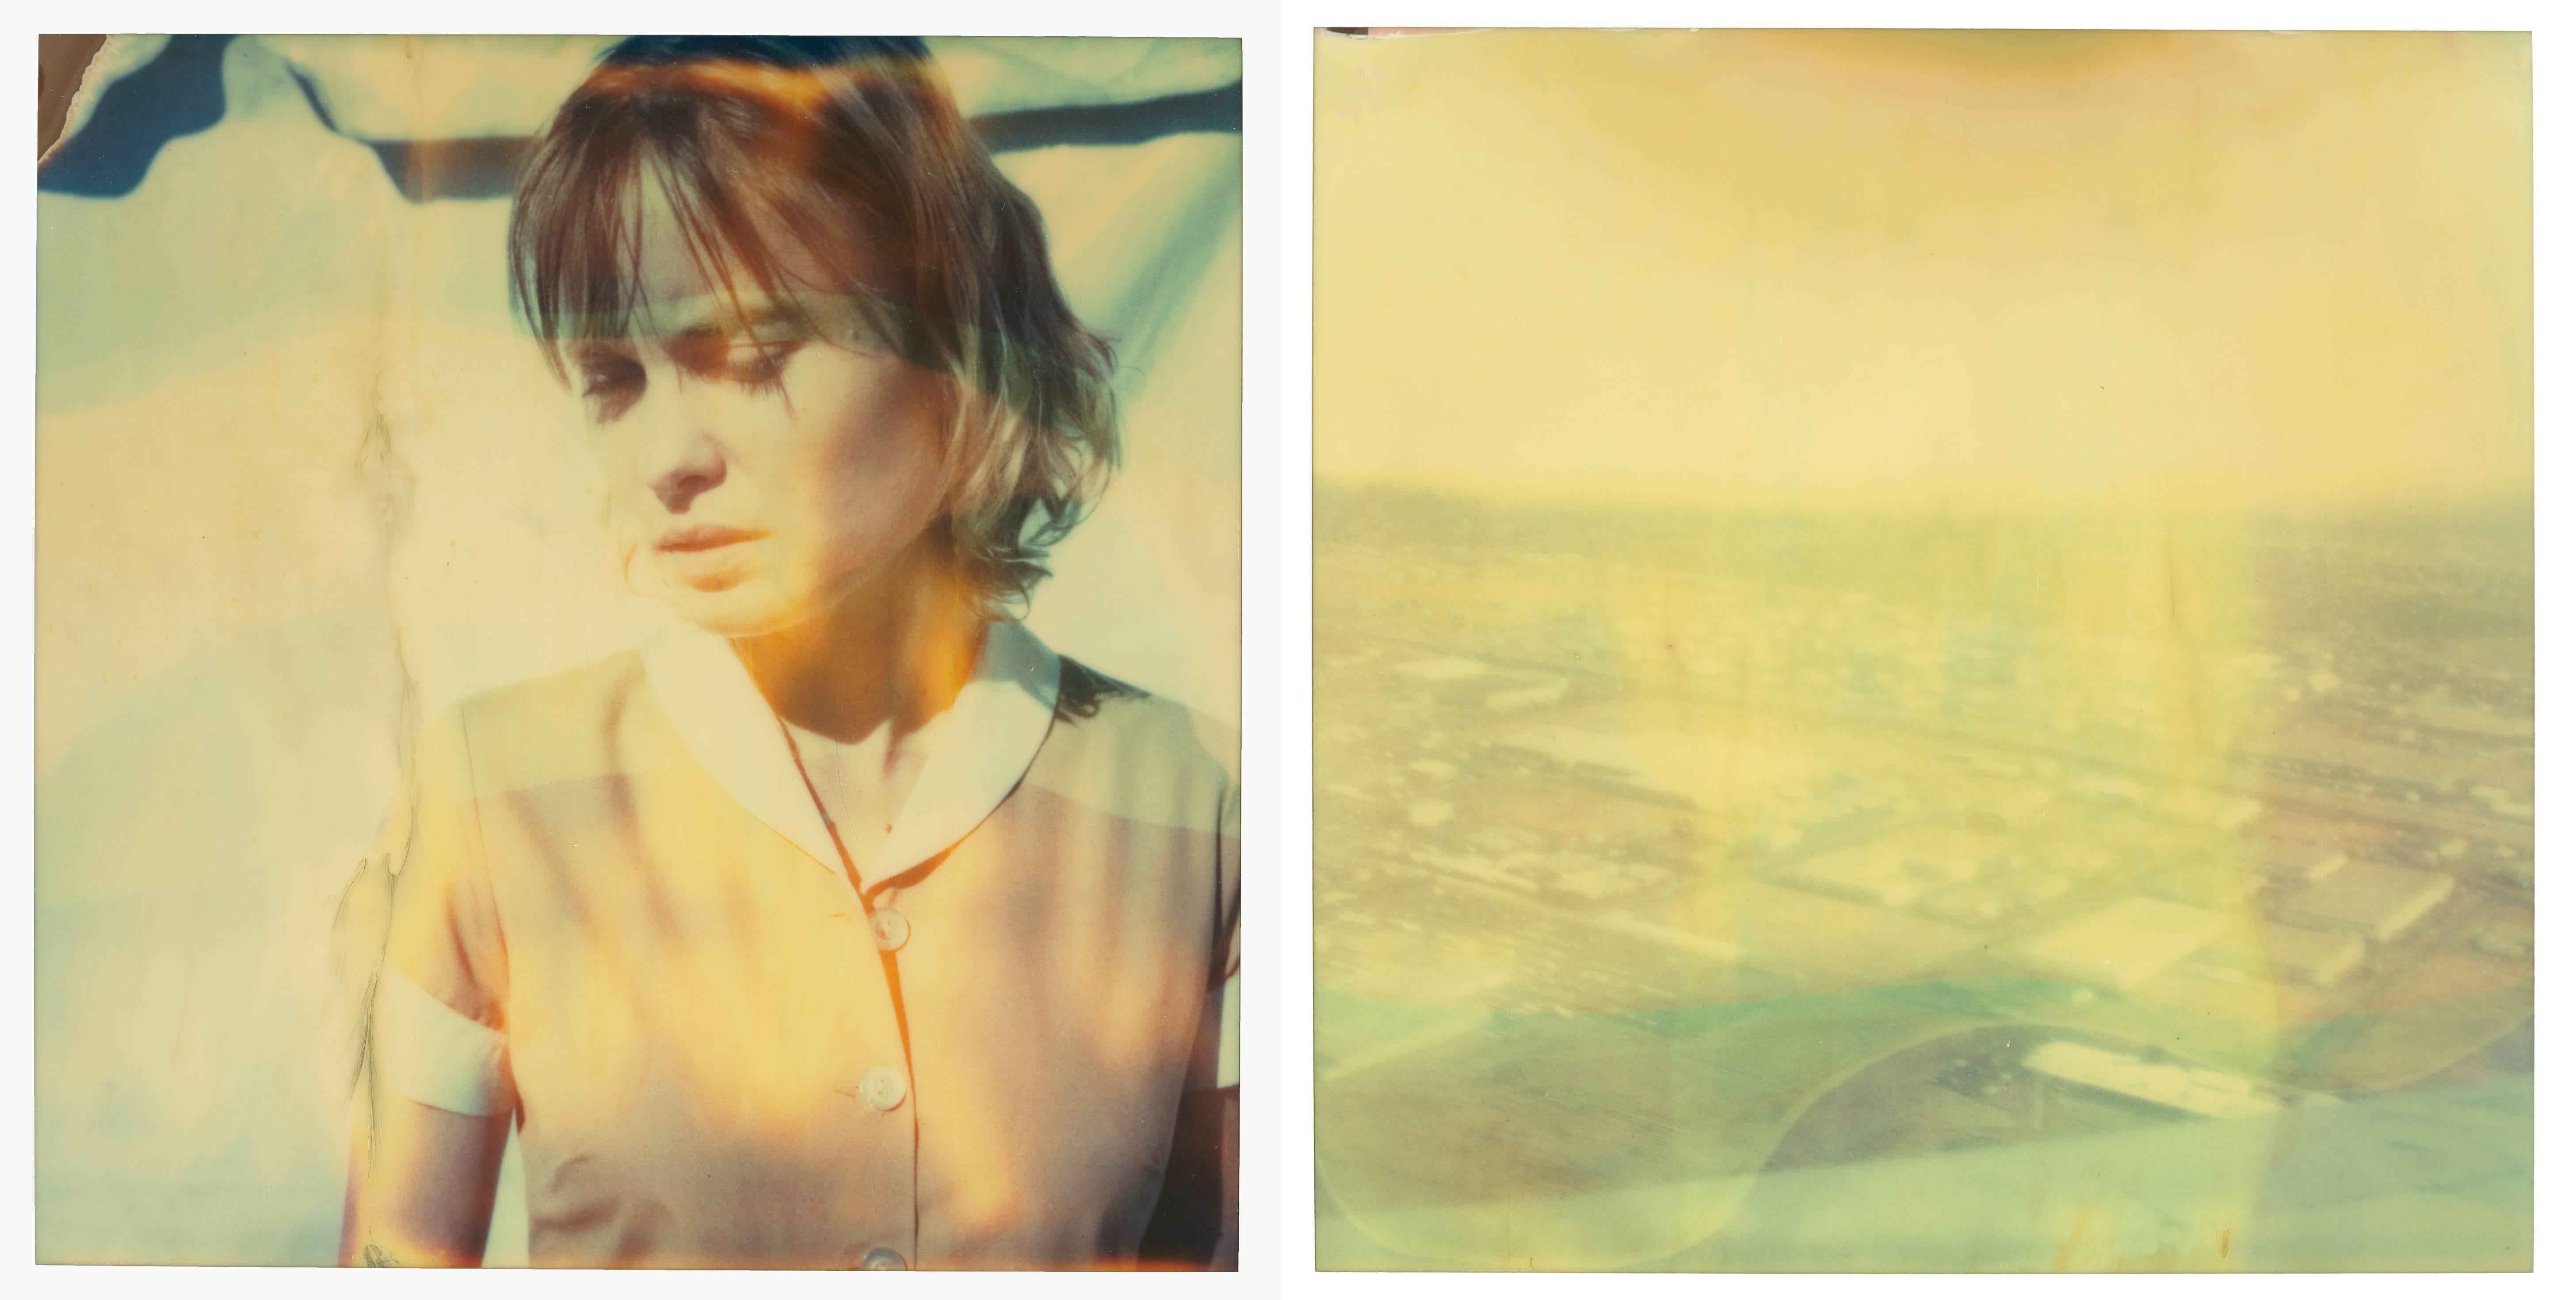 The Farmer's Wife's Dream - diptych, analog, based on two Polaroids